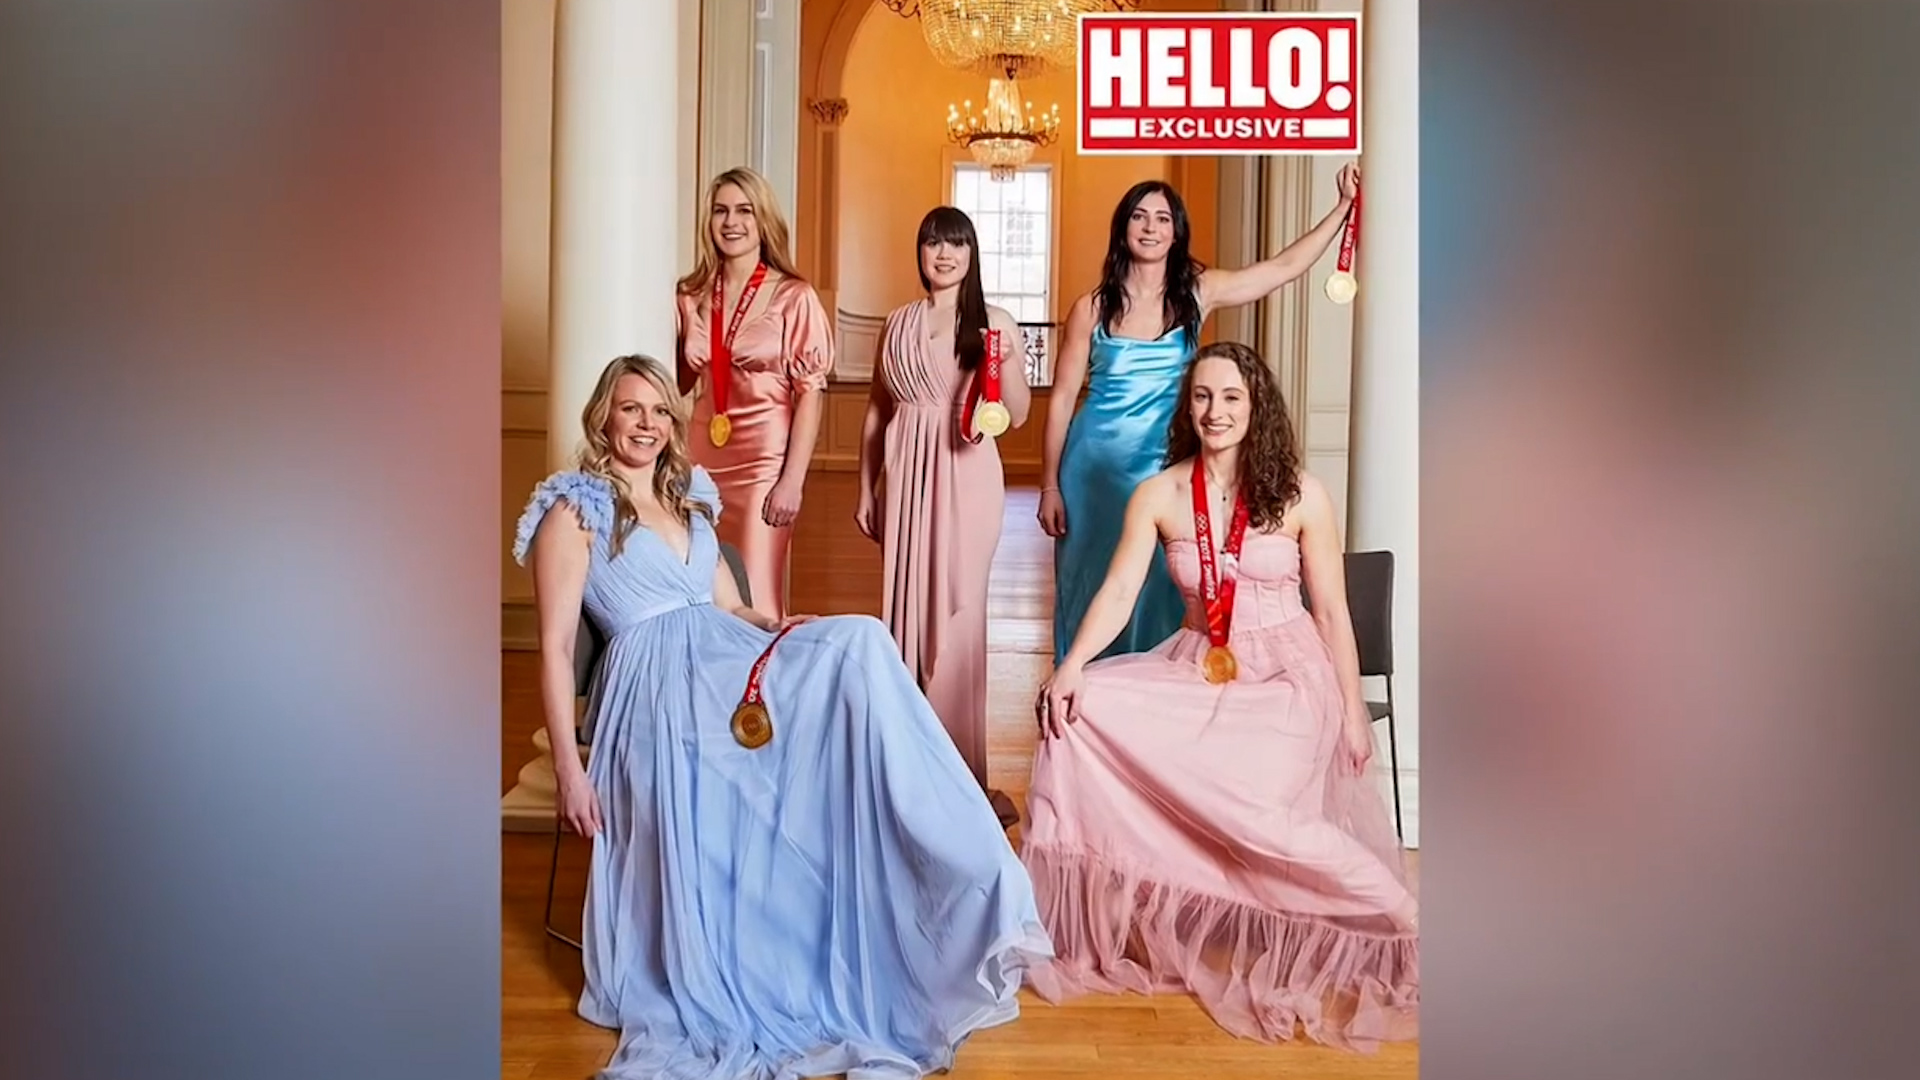 The GB team appeared on the front cover of Hello!